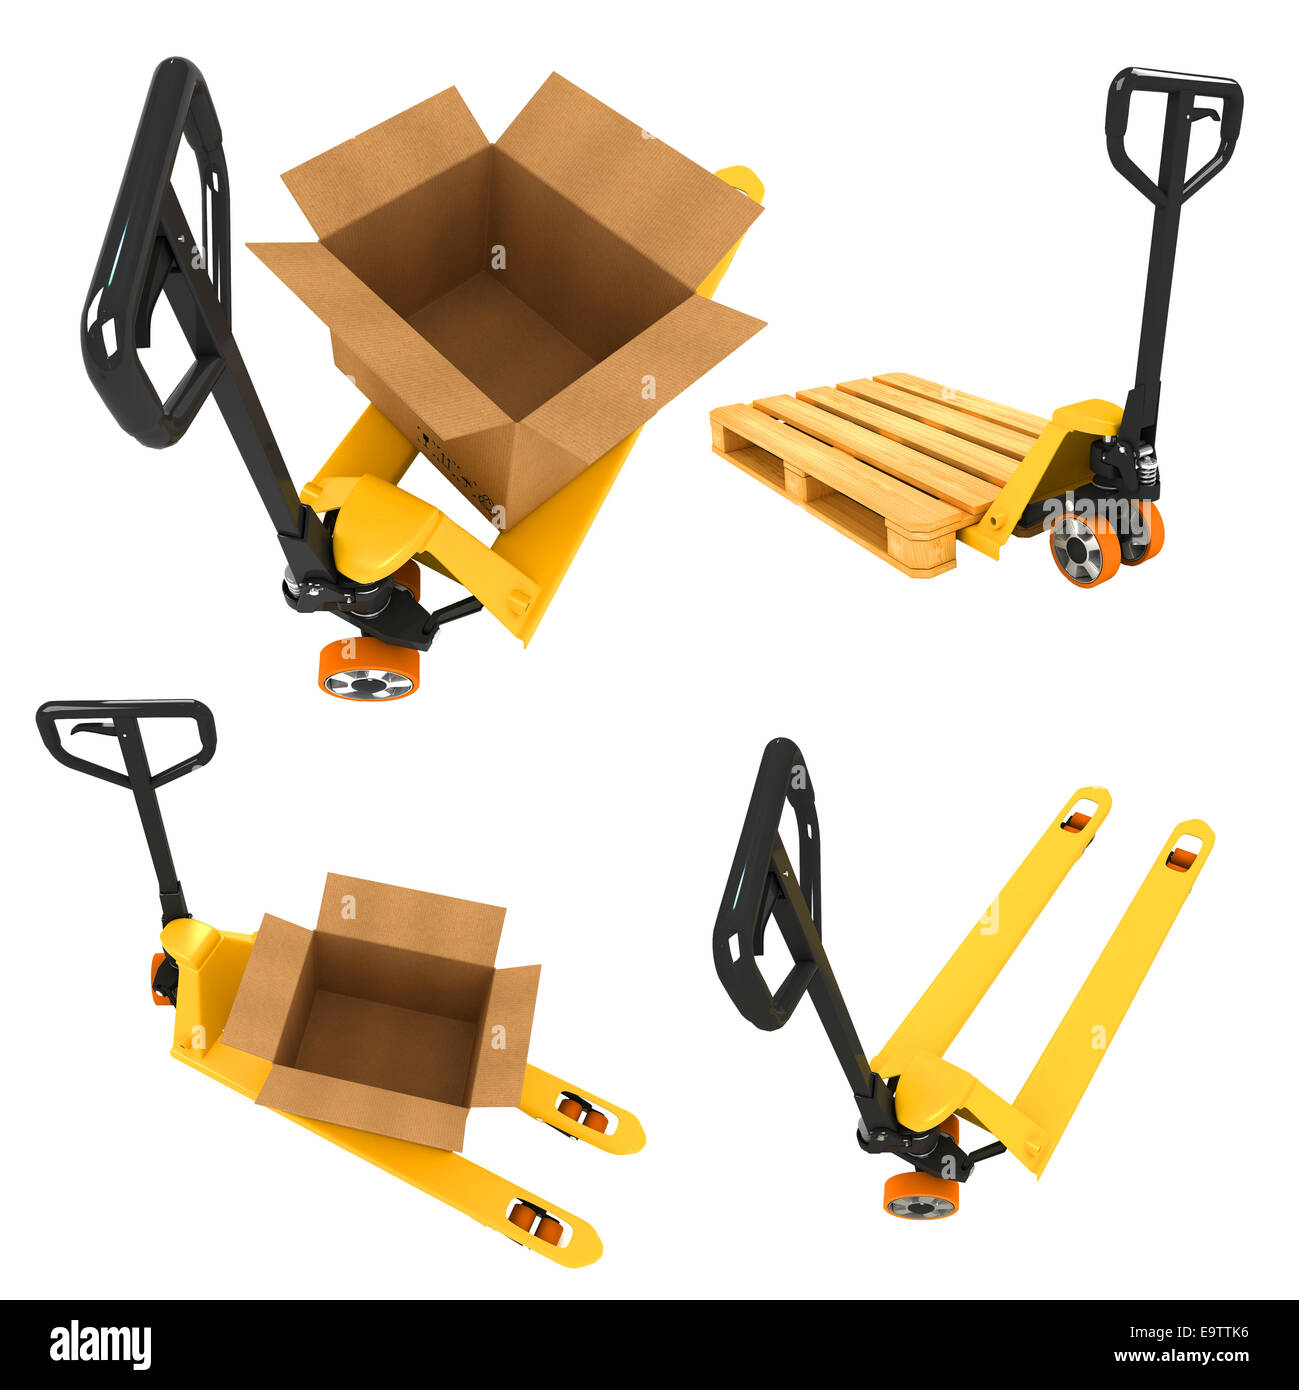 Shipment Concepts - Set of 3D Pallet Truck and Open Cardboard Boxes. Stock Photo